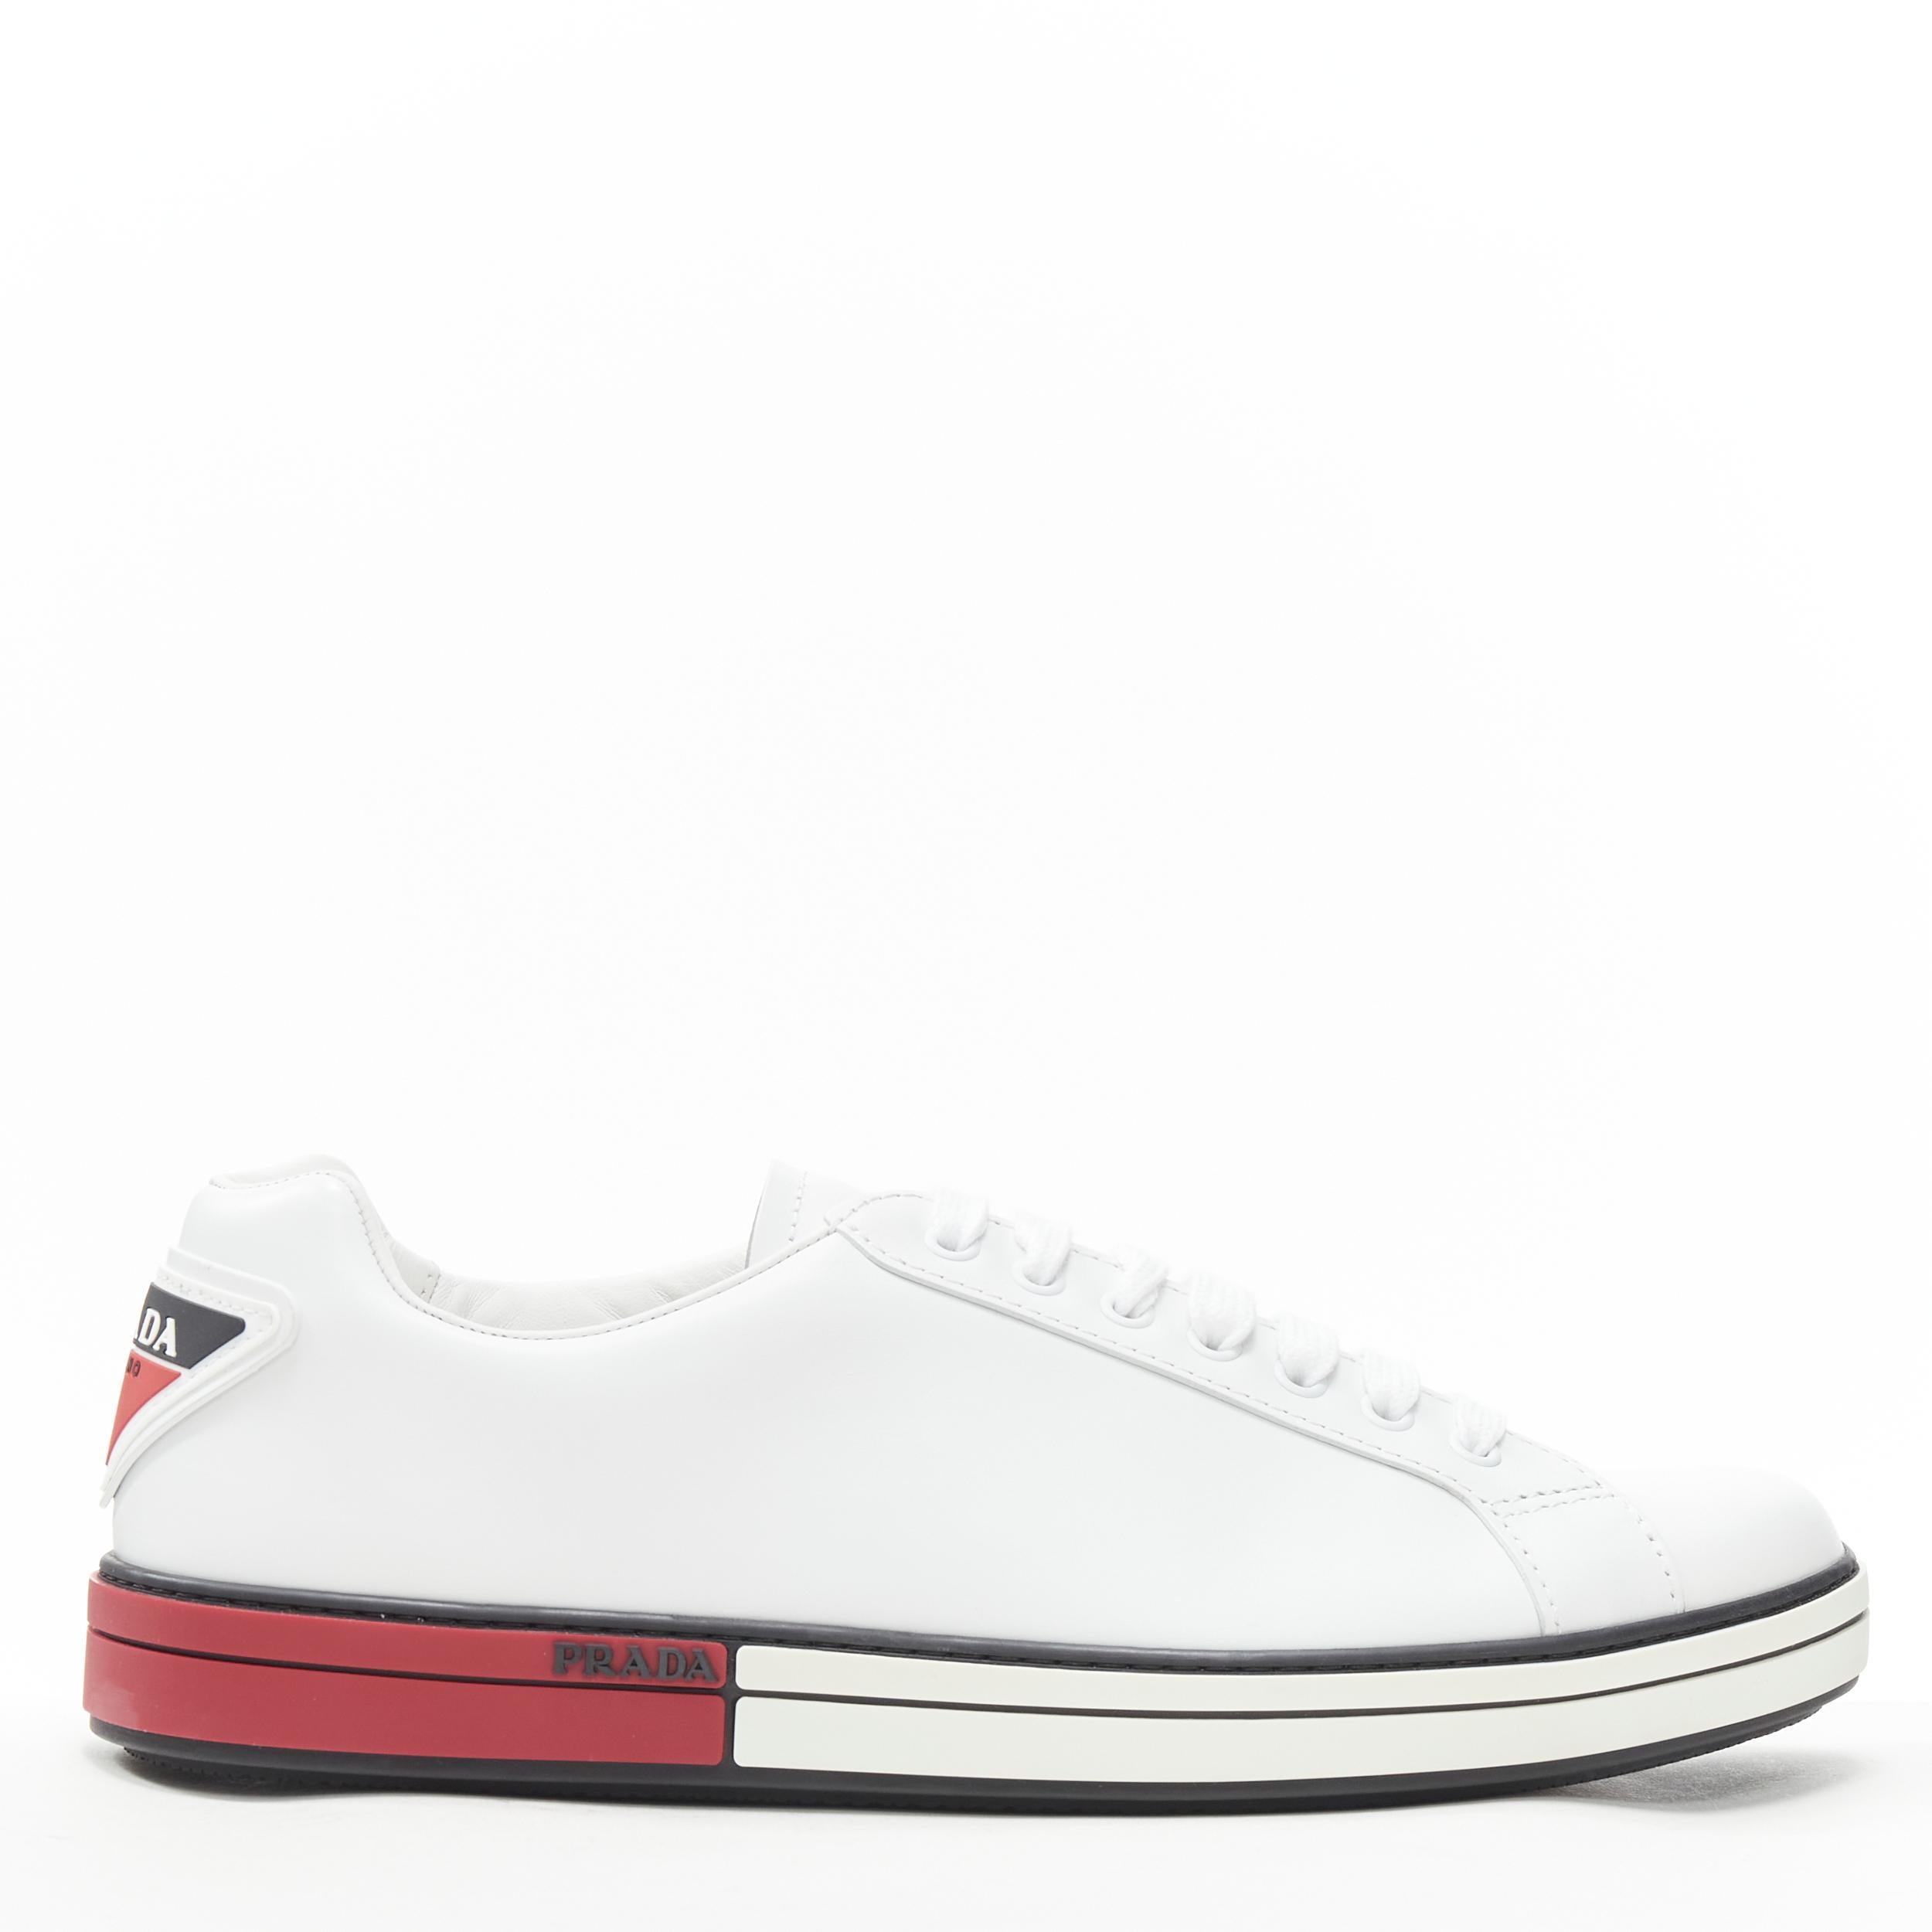 new PRADA white leather triangle logo red white midsole low sneaker UK9 US10 Reference: TGAS/B00918 
Brand: Prada 
Designer: Miuccia Prada 
Model: White sneaker 
Collection: 2018 
Material: Leather 
Color: White 
Pattern: Solid 
Closure: Laces